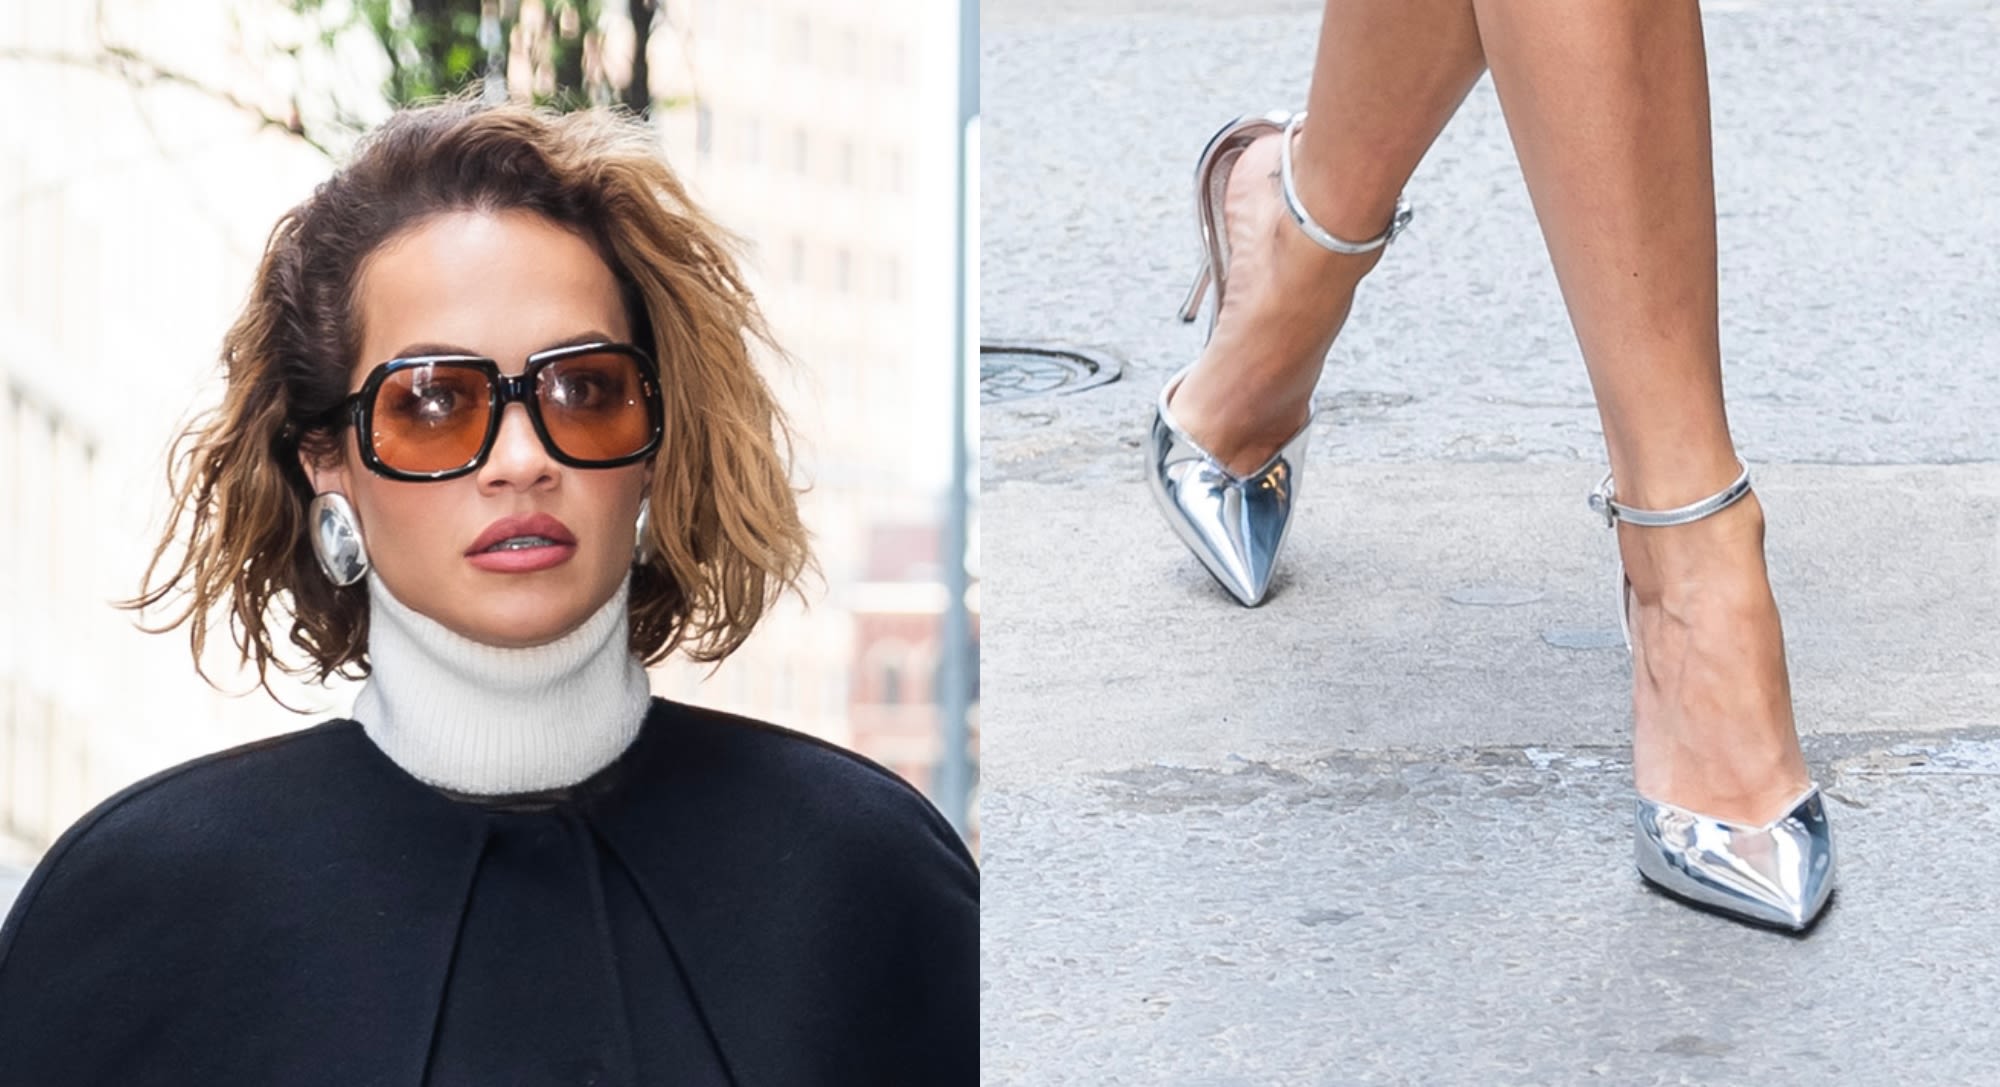 Rita Ora Hops on Metallic Trend With Mirrored, Pointy-Toe Shoes in Tribeca